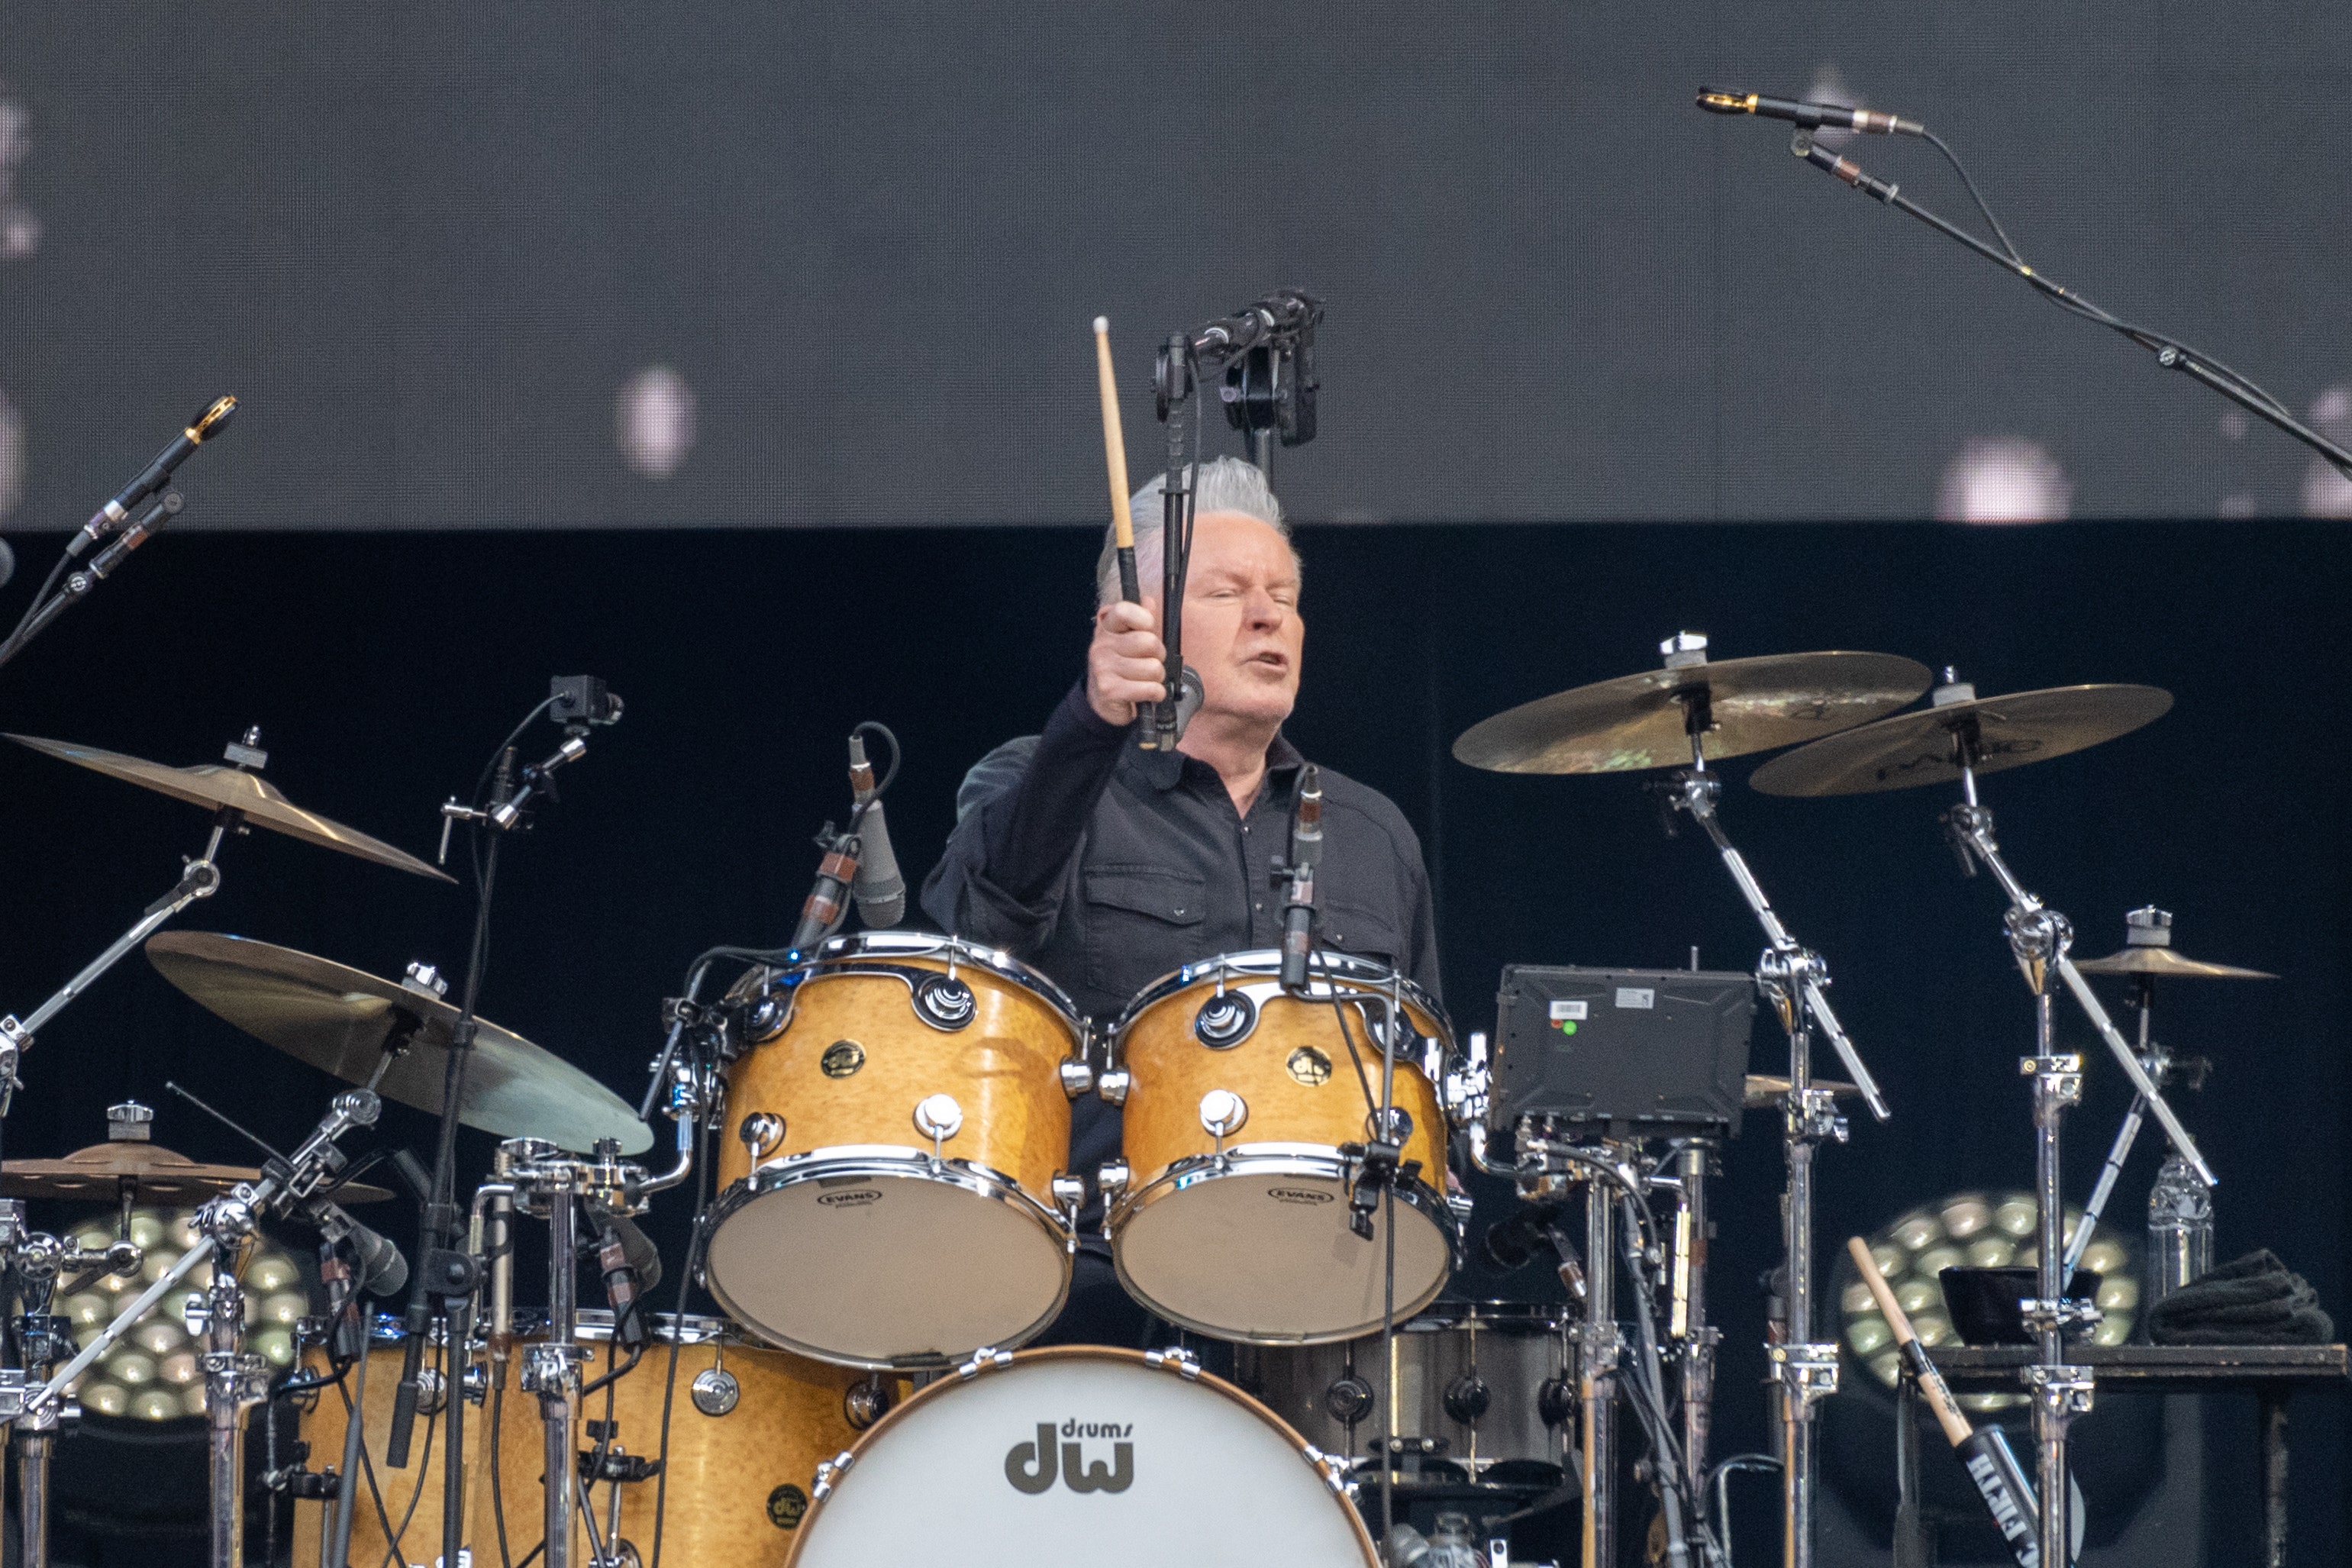 Don Henley on the drums